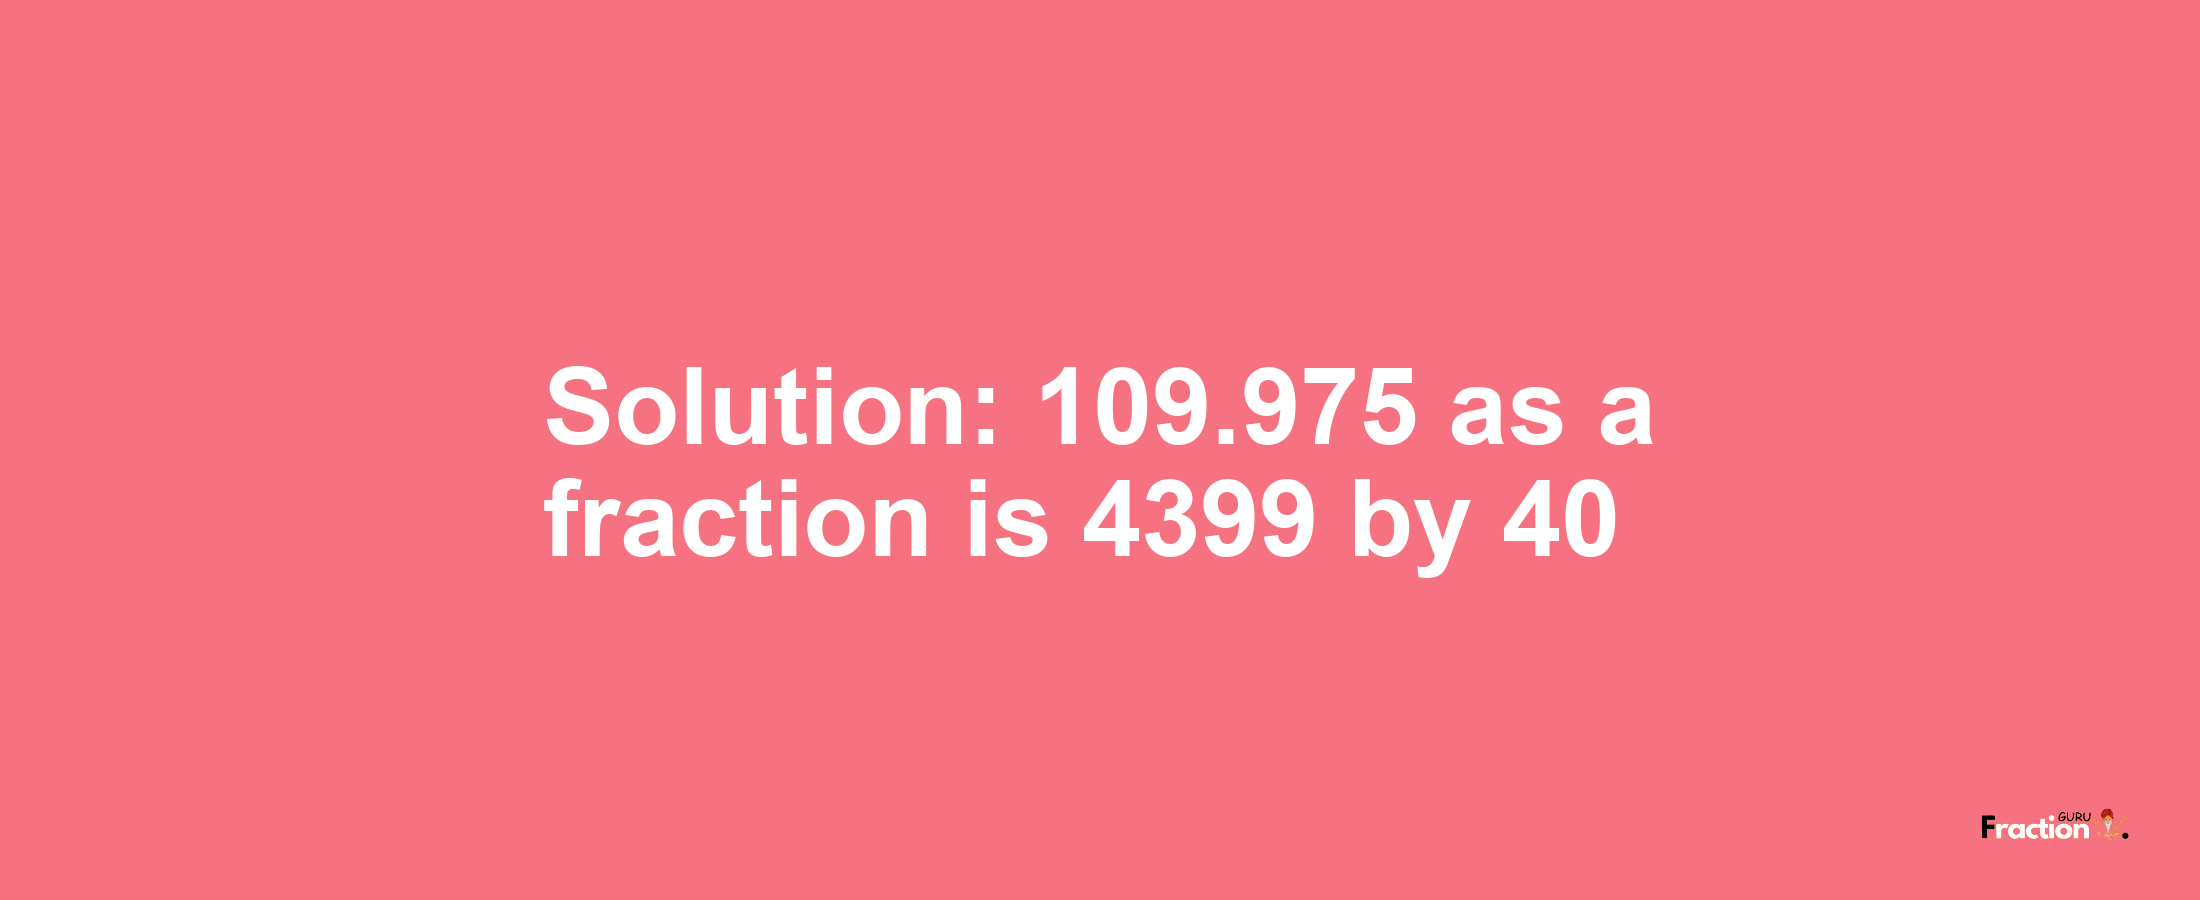 Solution:109.975 as a fraction is 4399/40